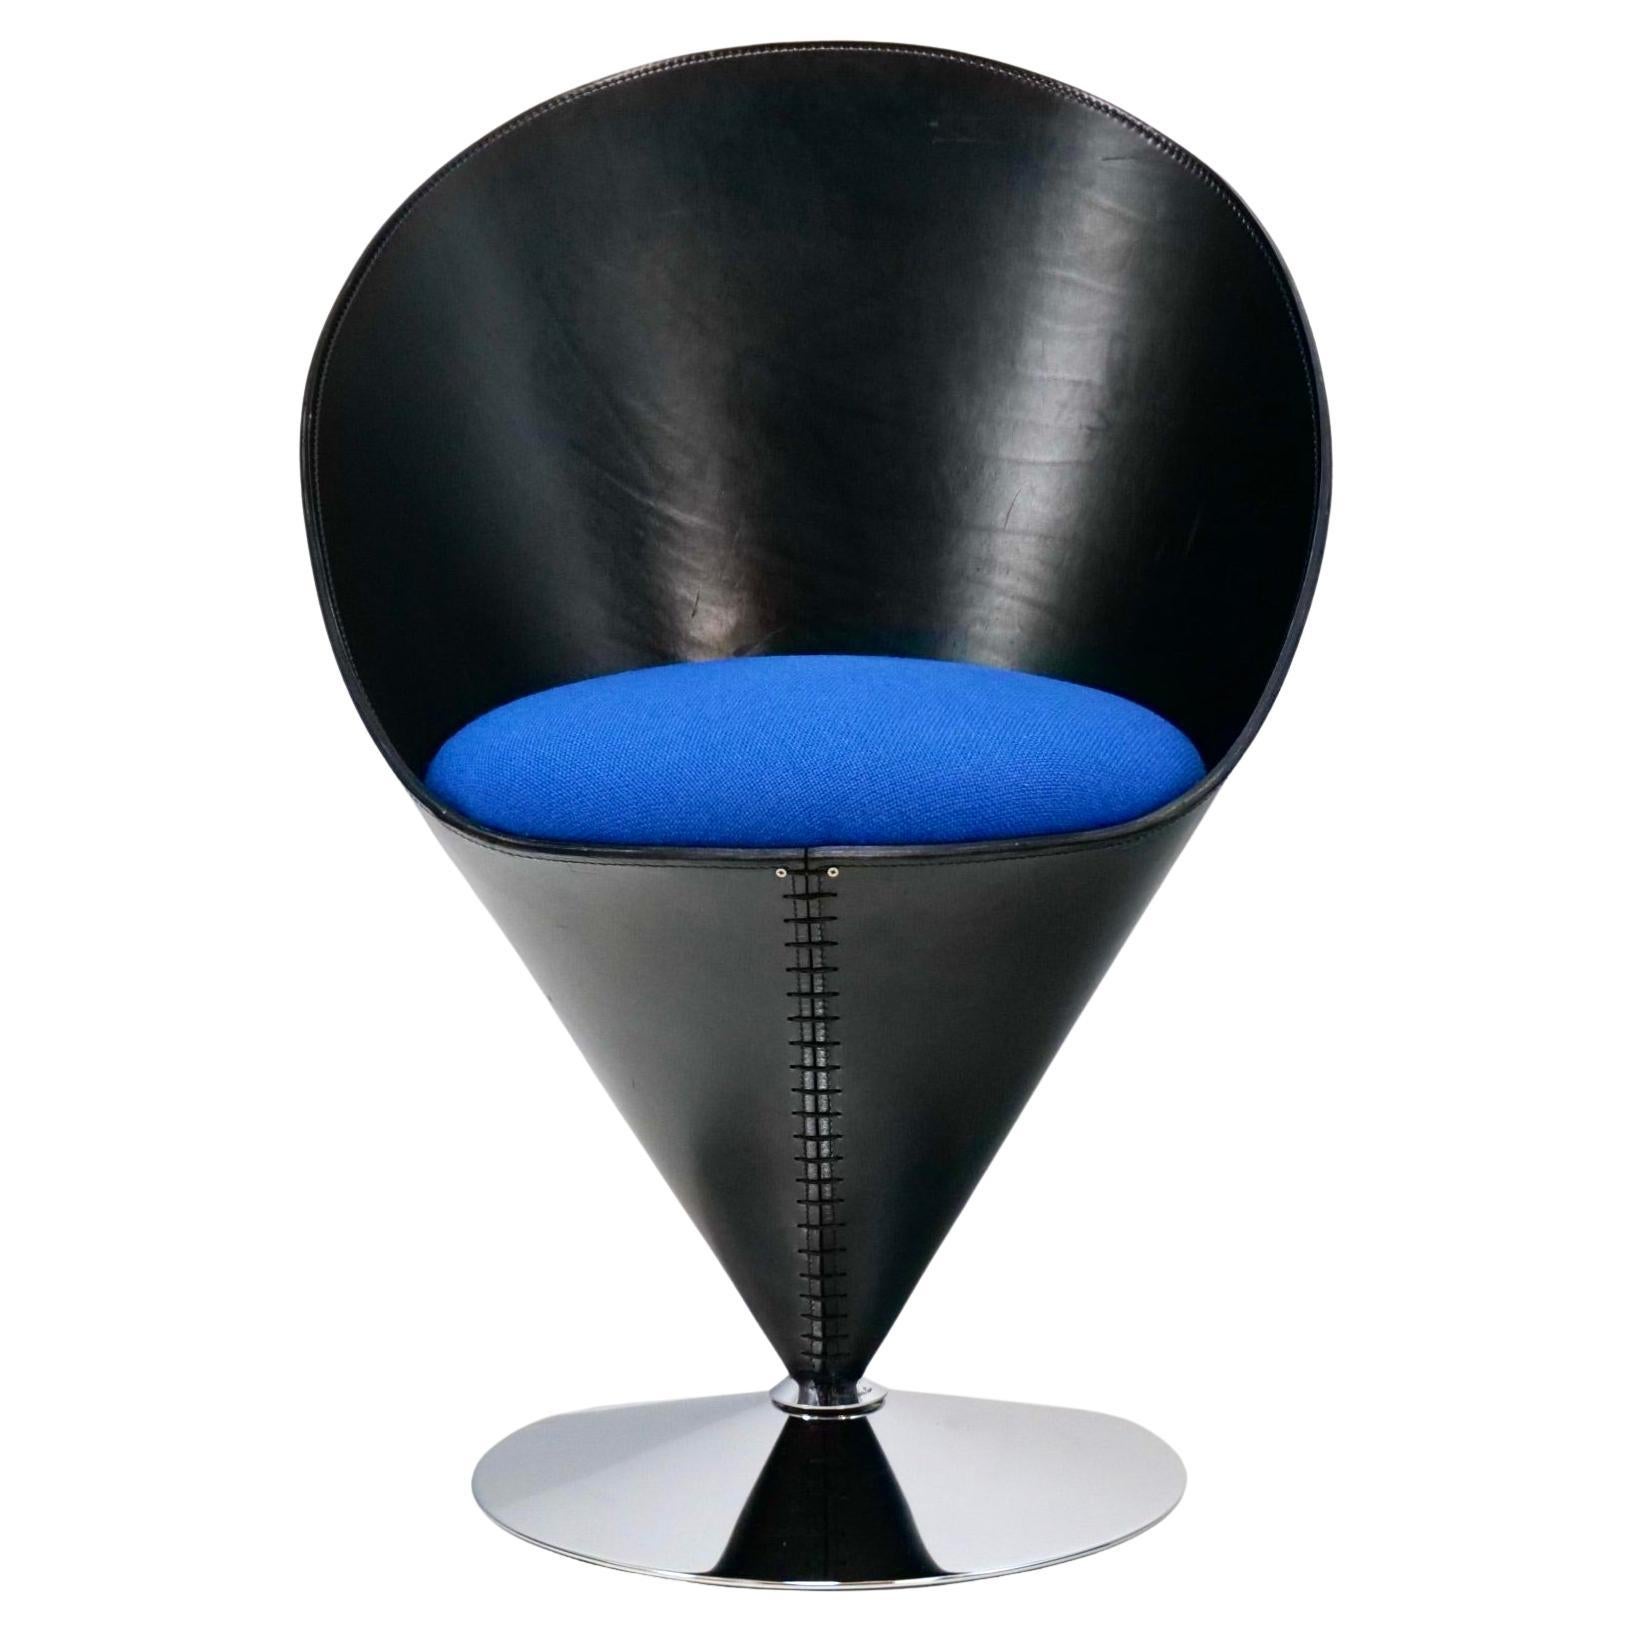 Very rare out of production Verner Panton leather cone chair

signed Polythema - Verner Panton and No: - 207


good condition with slight signs of use.